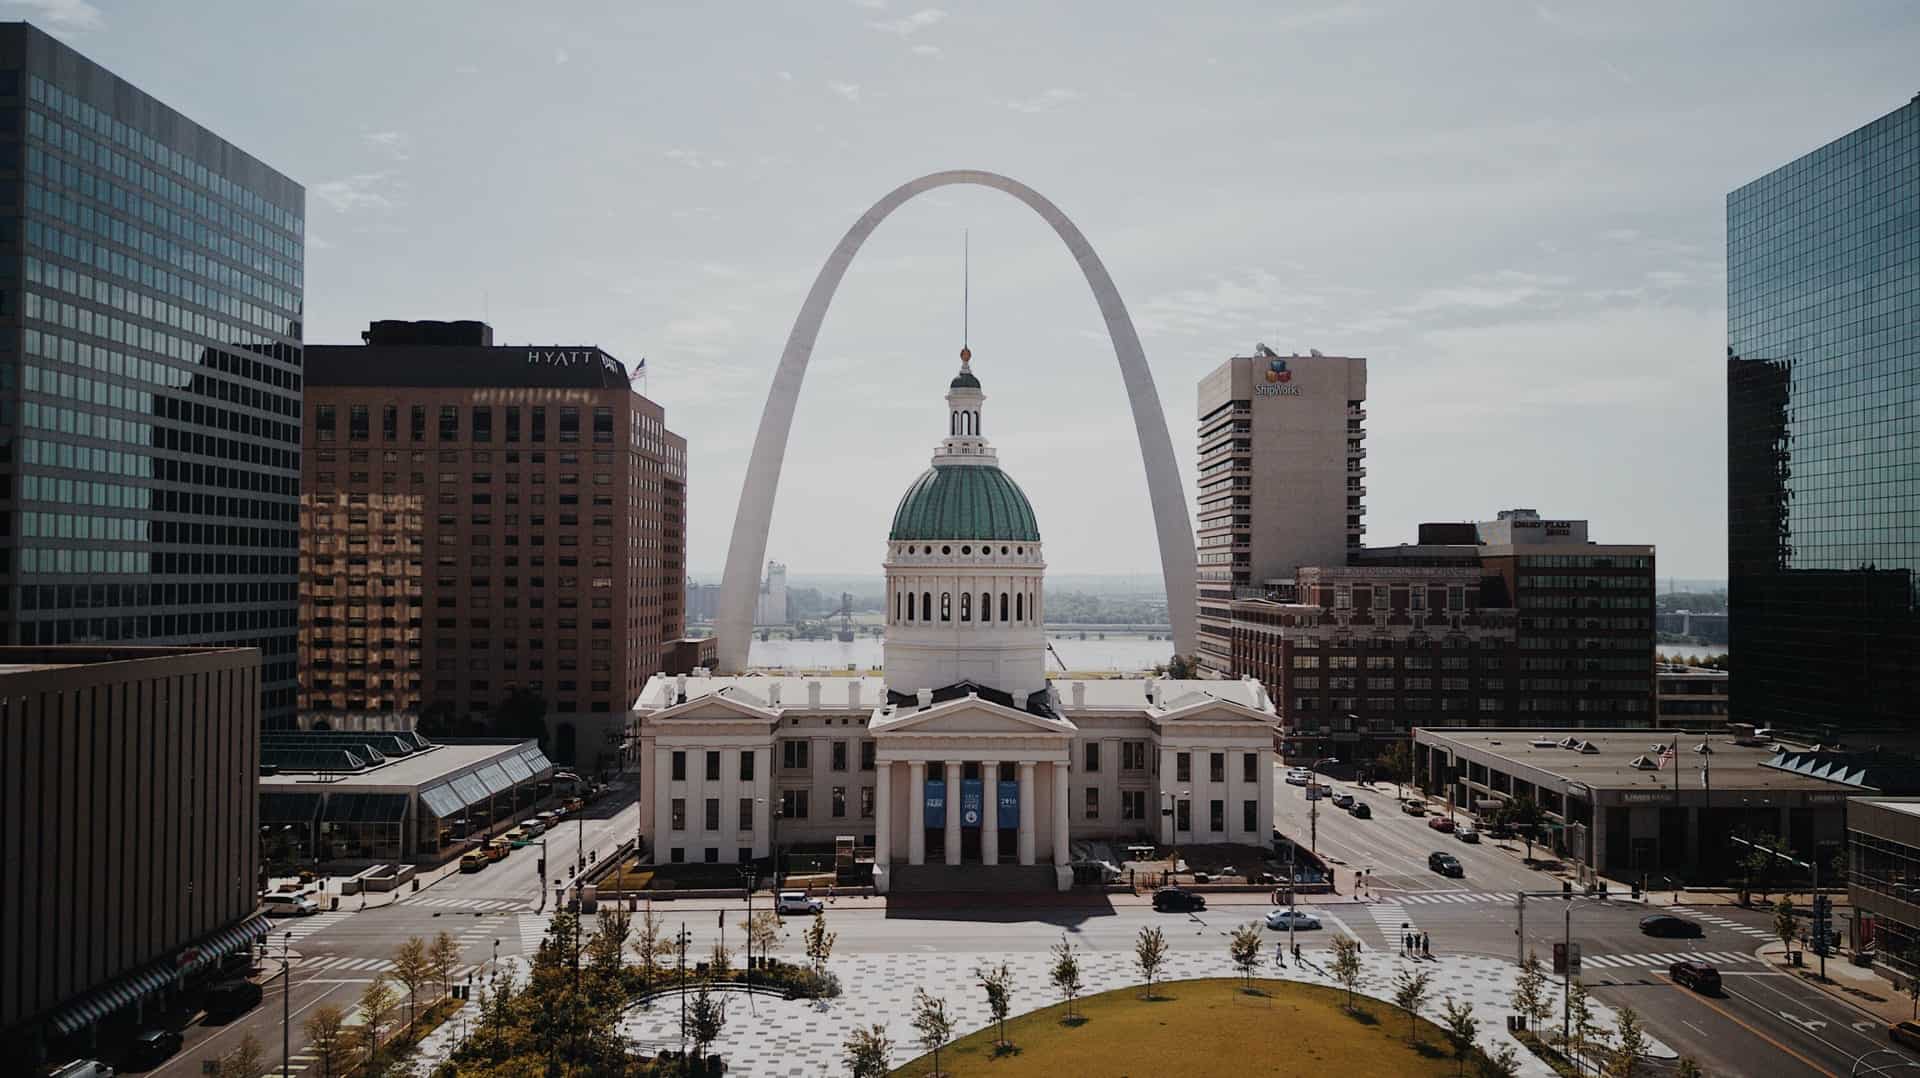 Best things to do in St Louis Missouri - John O'Leary - Gateway Arch and Old Courthouse by Brittney Butler on Unsplash